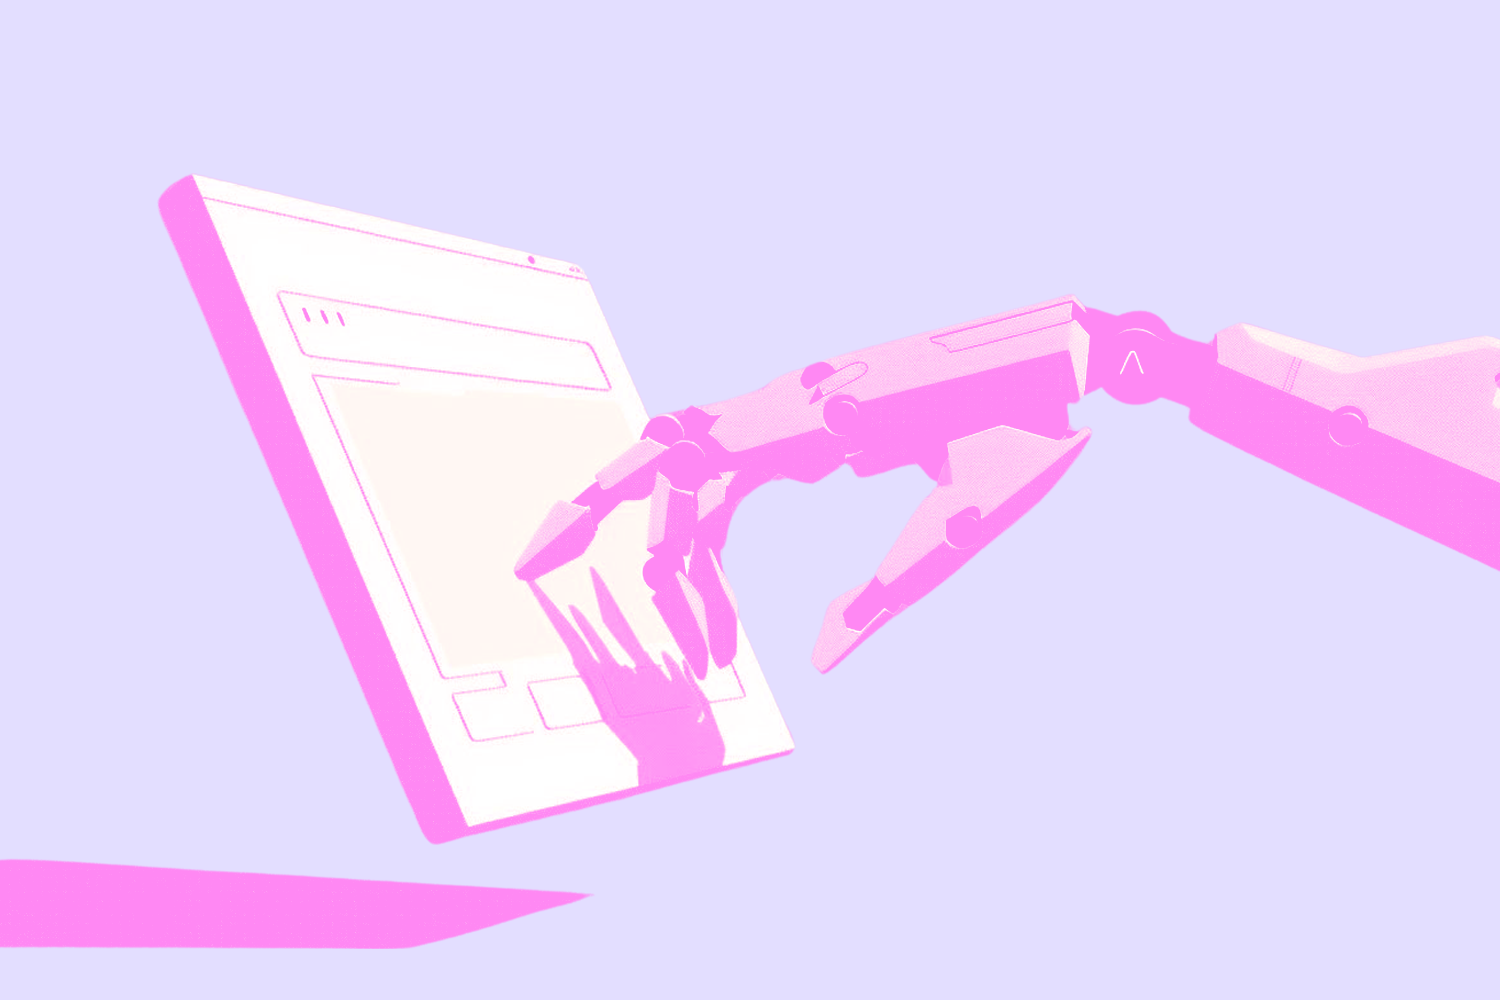 An AI robot arm reaching out and touching a web browser screen displaying a search query